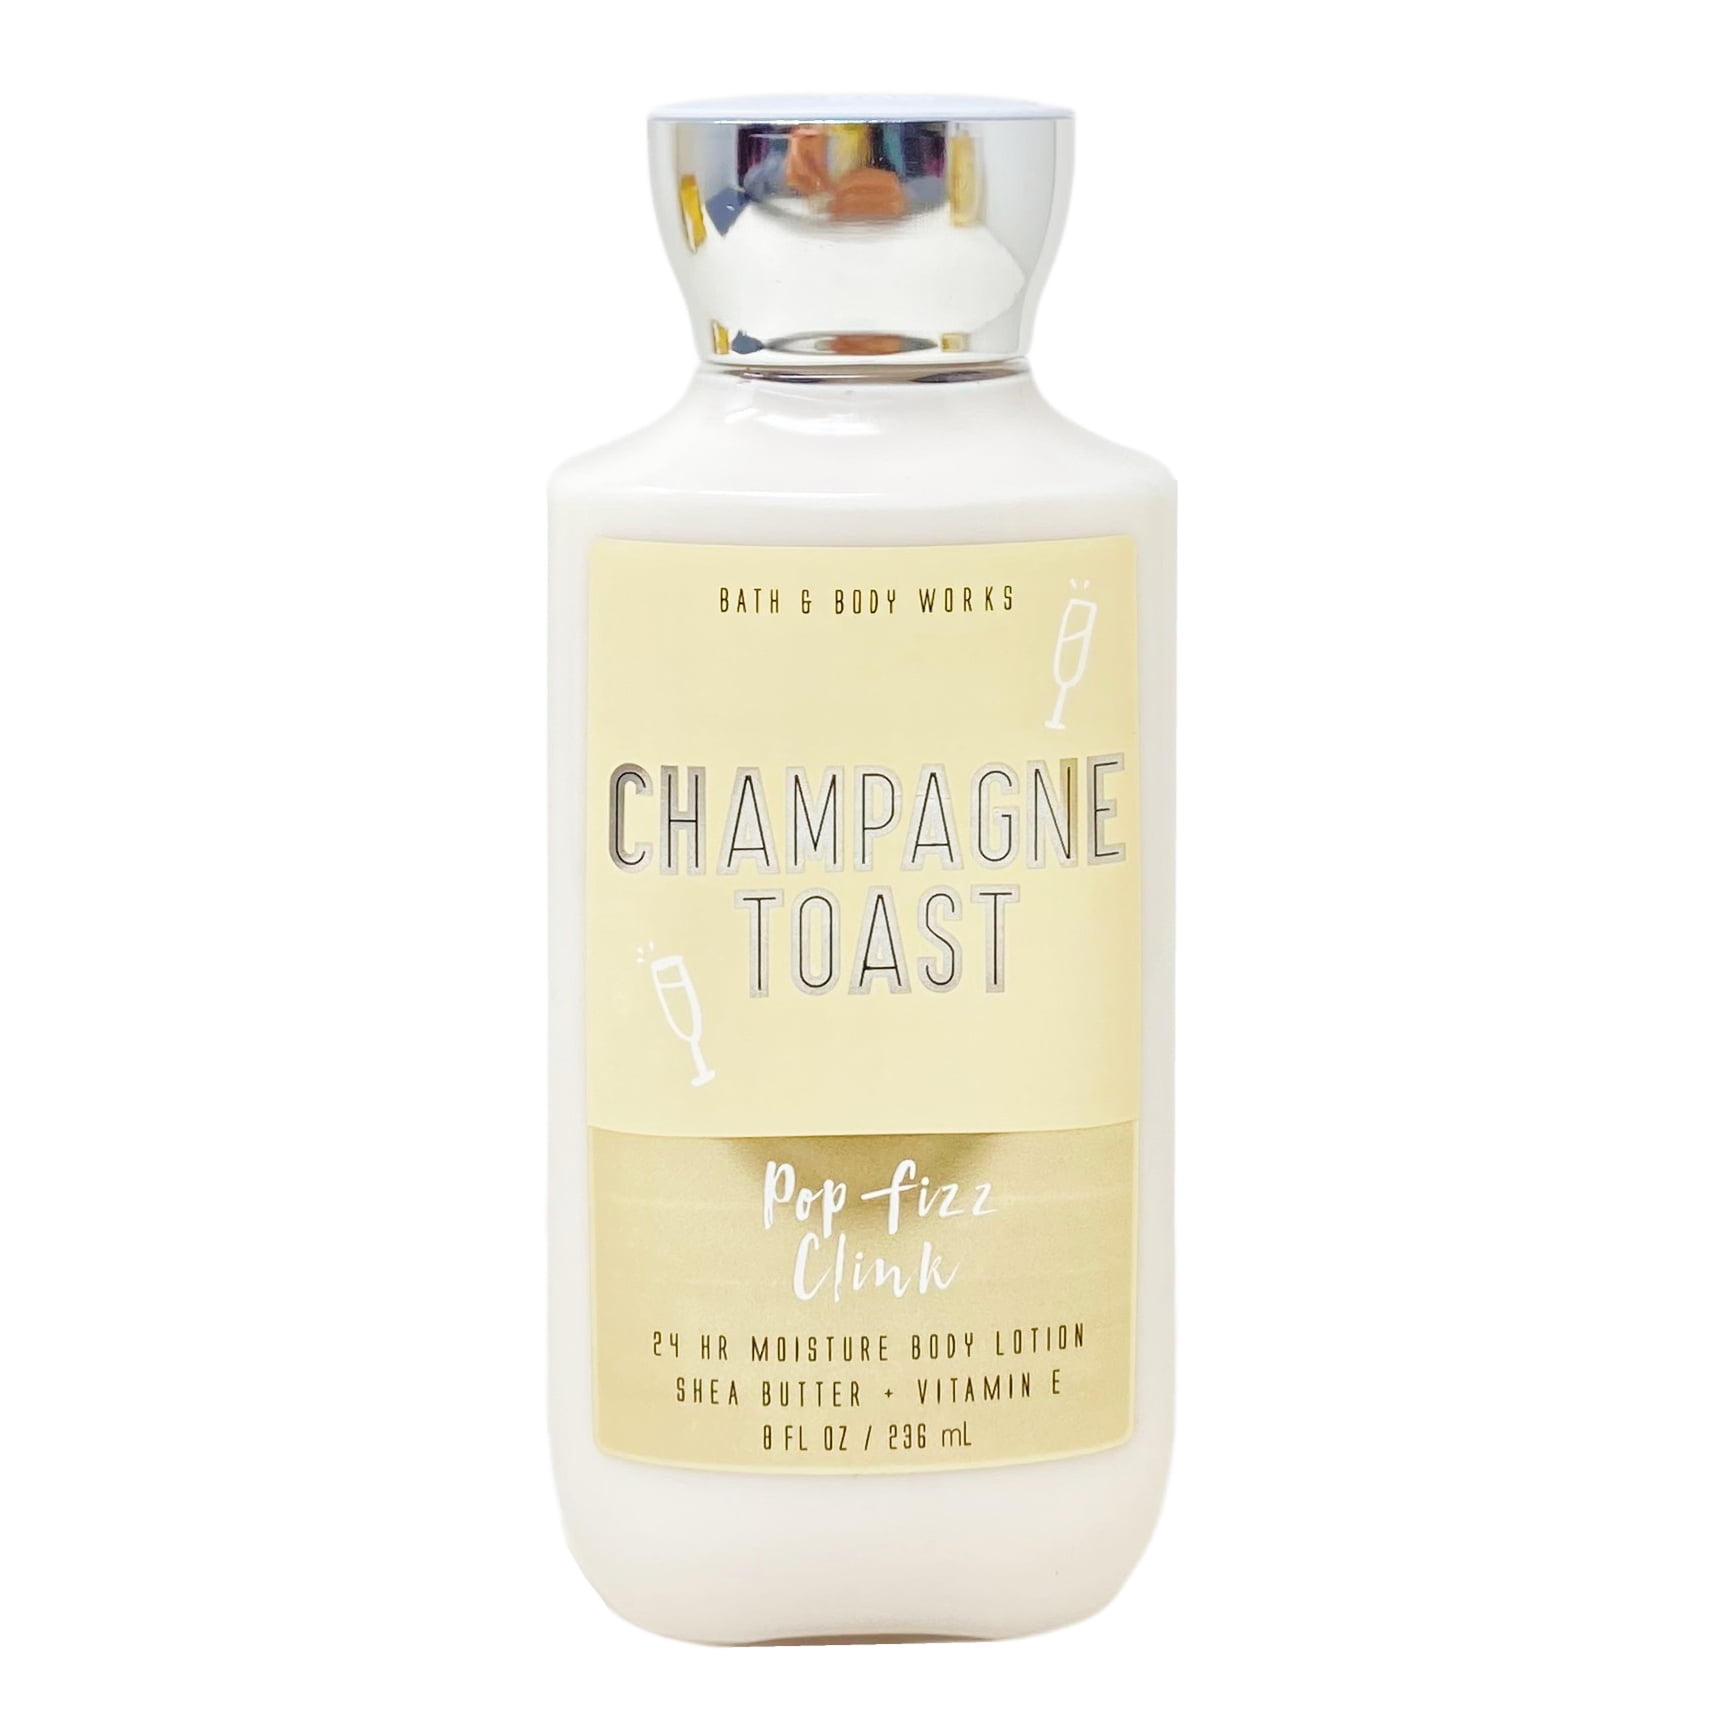 Bath and Body Works Champagne Toast Pop Fizz Clink 24 Hour Moisture Body  Lotion Bundle - Pack of 2 